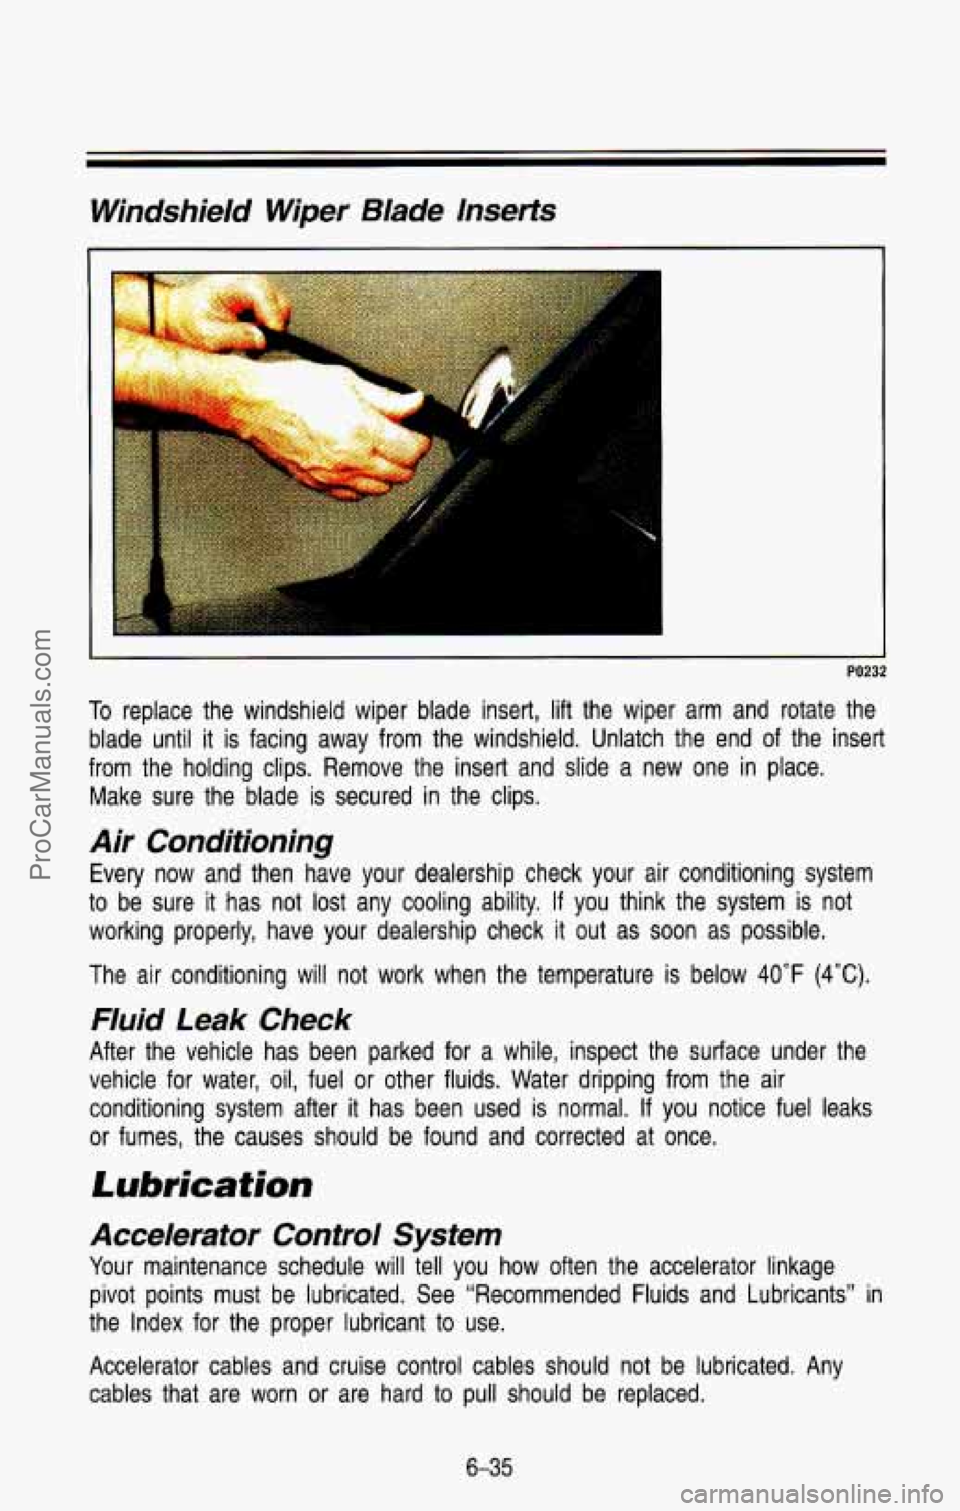 CHEVROLET SUBURBAN 1993  Owners Manual Windshield  Wiper Blade lnserfs 
J 
PO232 
To replace  the  windshield  wiper  blade  insert, lift the  wiper  arm  and  rotate  the 
blade  until 
it is  facing  away  from  the  windshield.  Unlatch